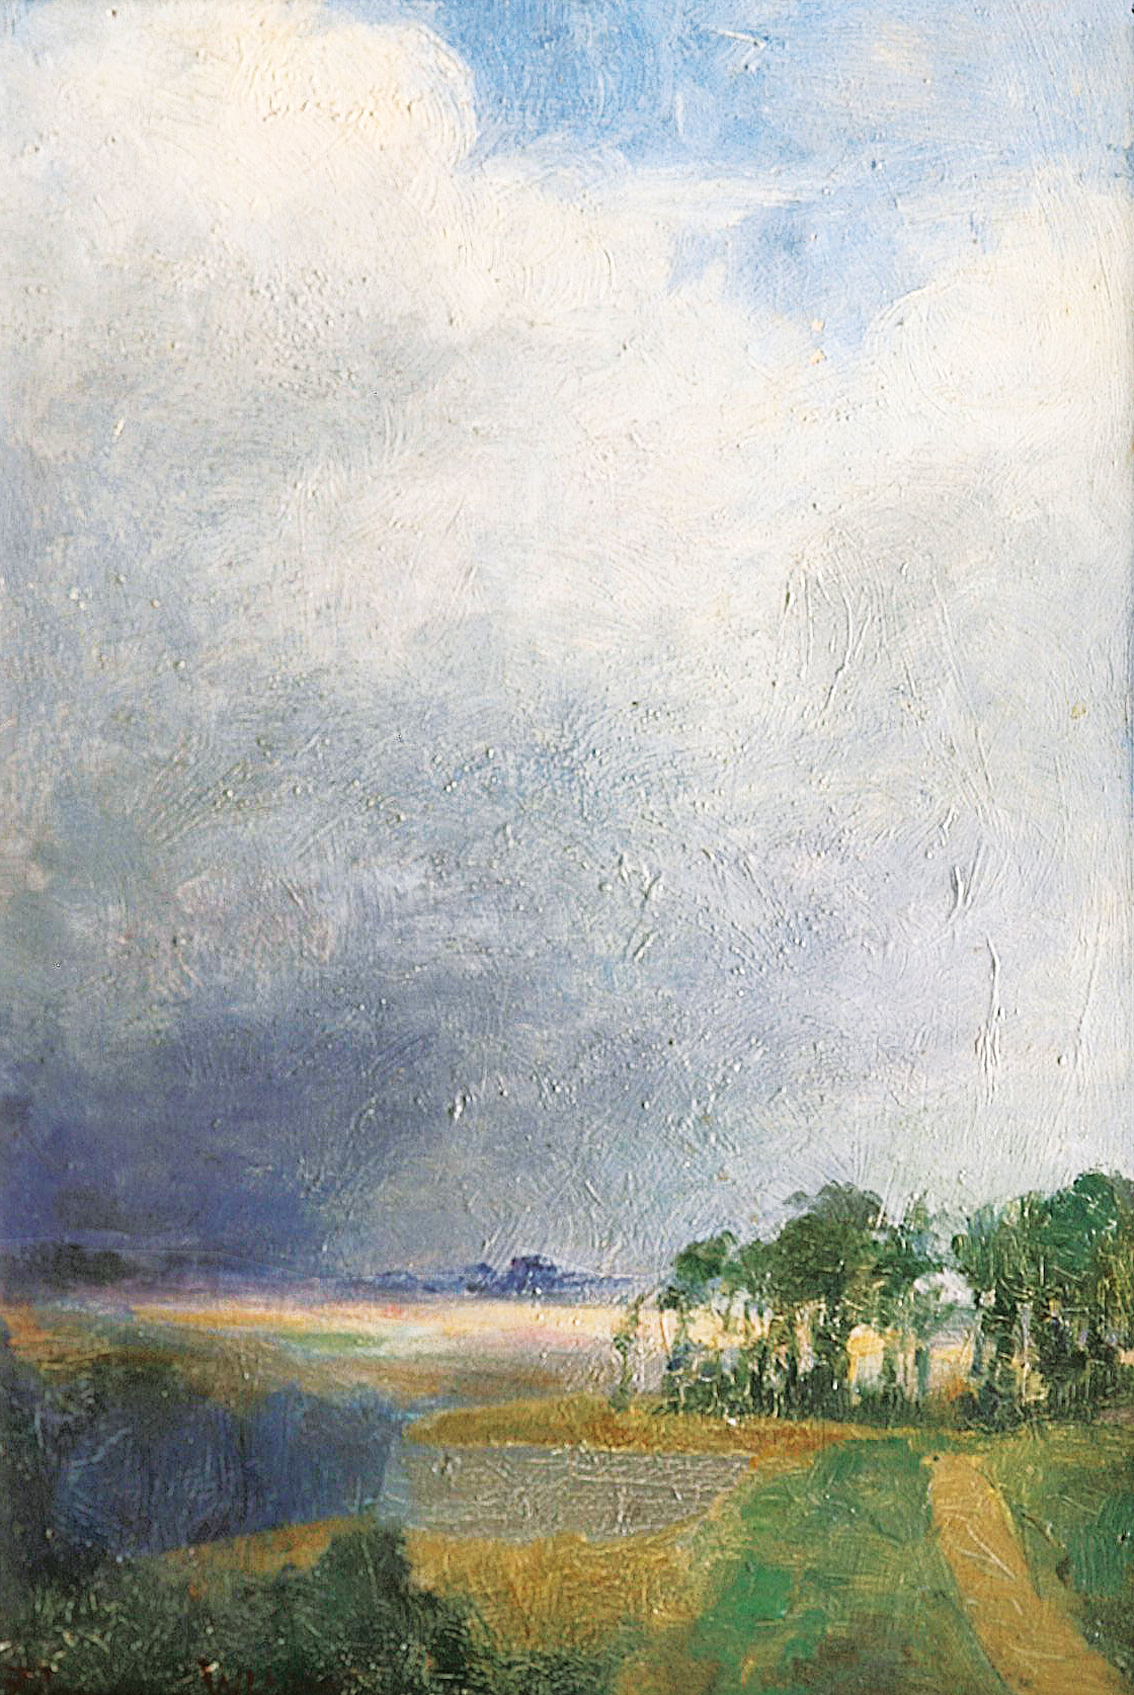 A summer landscape in an upcoming storm